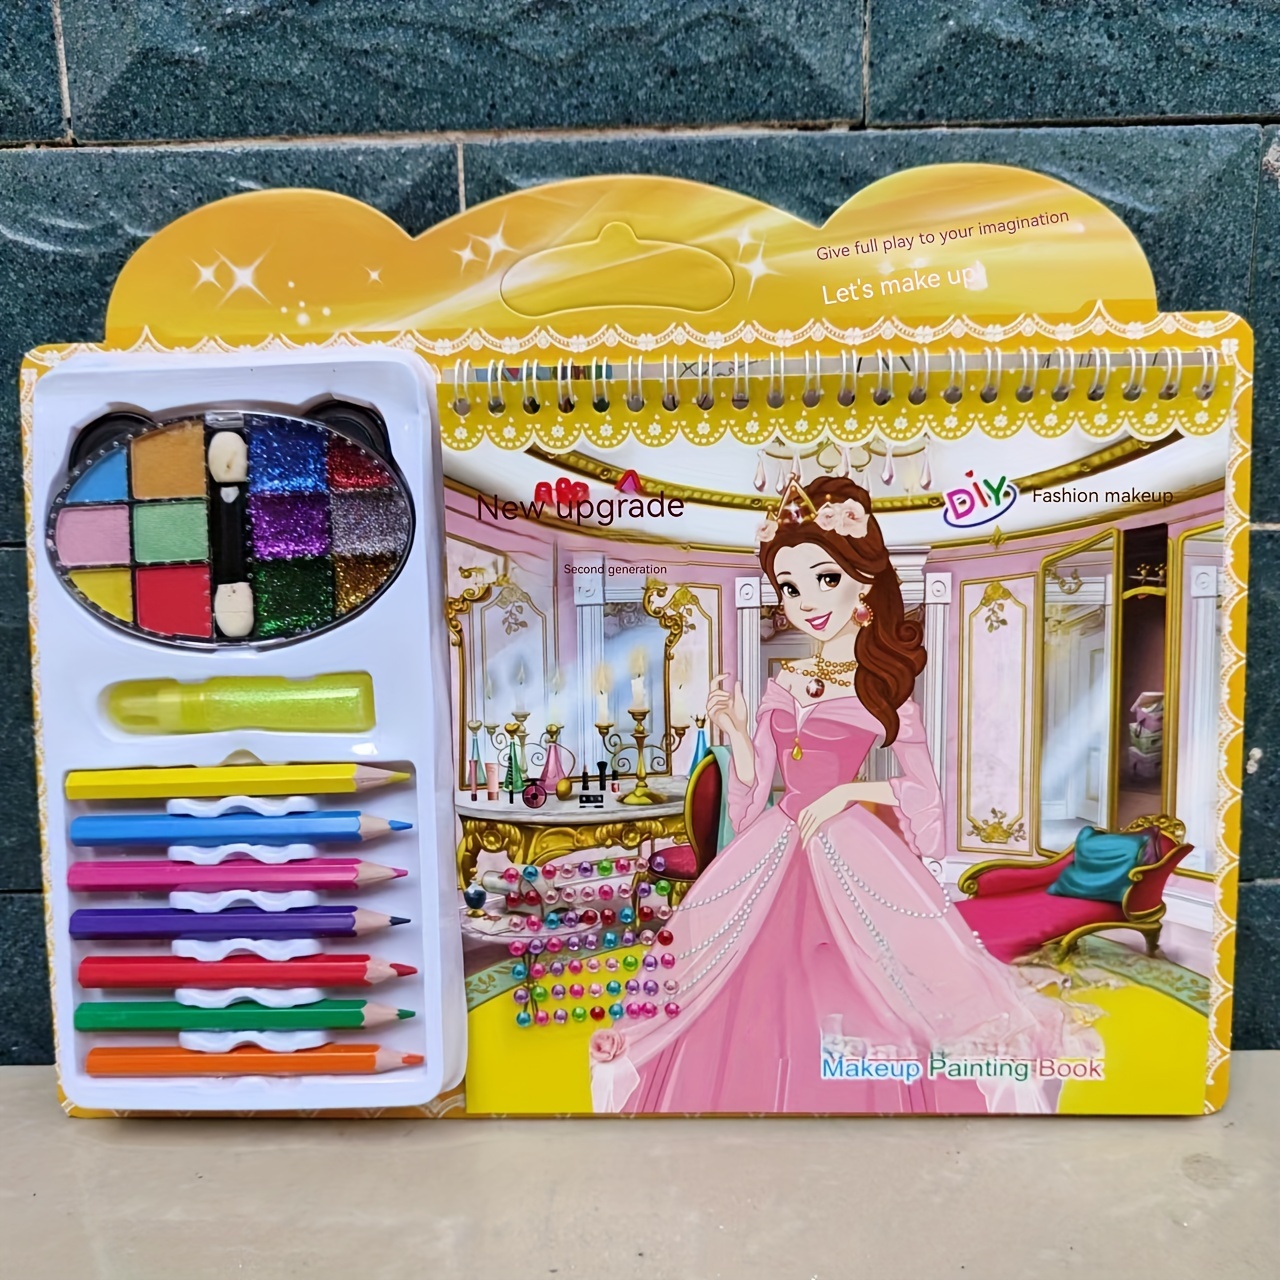  Disney Princess Art Set, Arts and Crafts for Kids 60 Pieces  Colouring Sets for Girls Creative Drawing and Painting Sets for Children Art  Supplies : Toys & Games